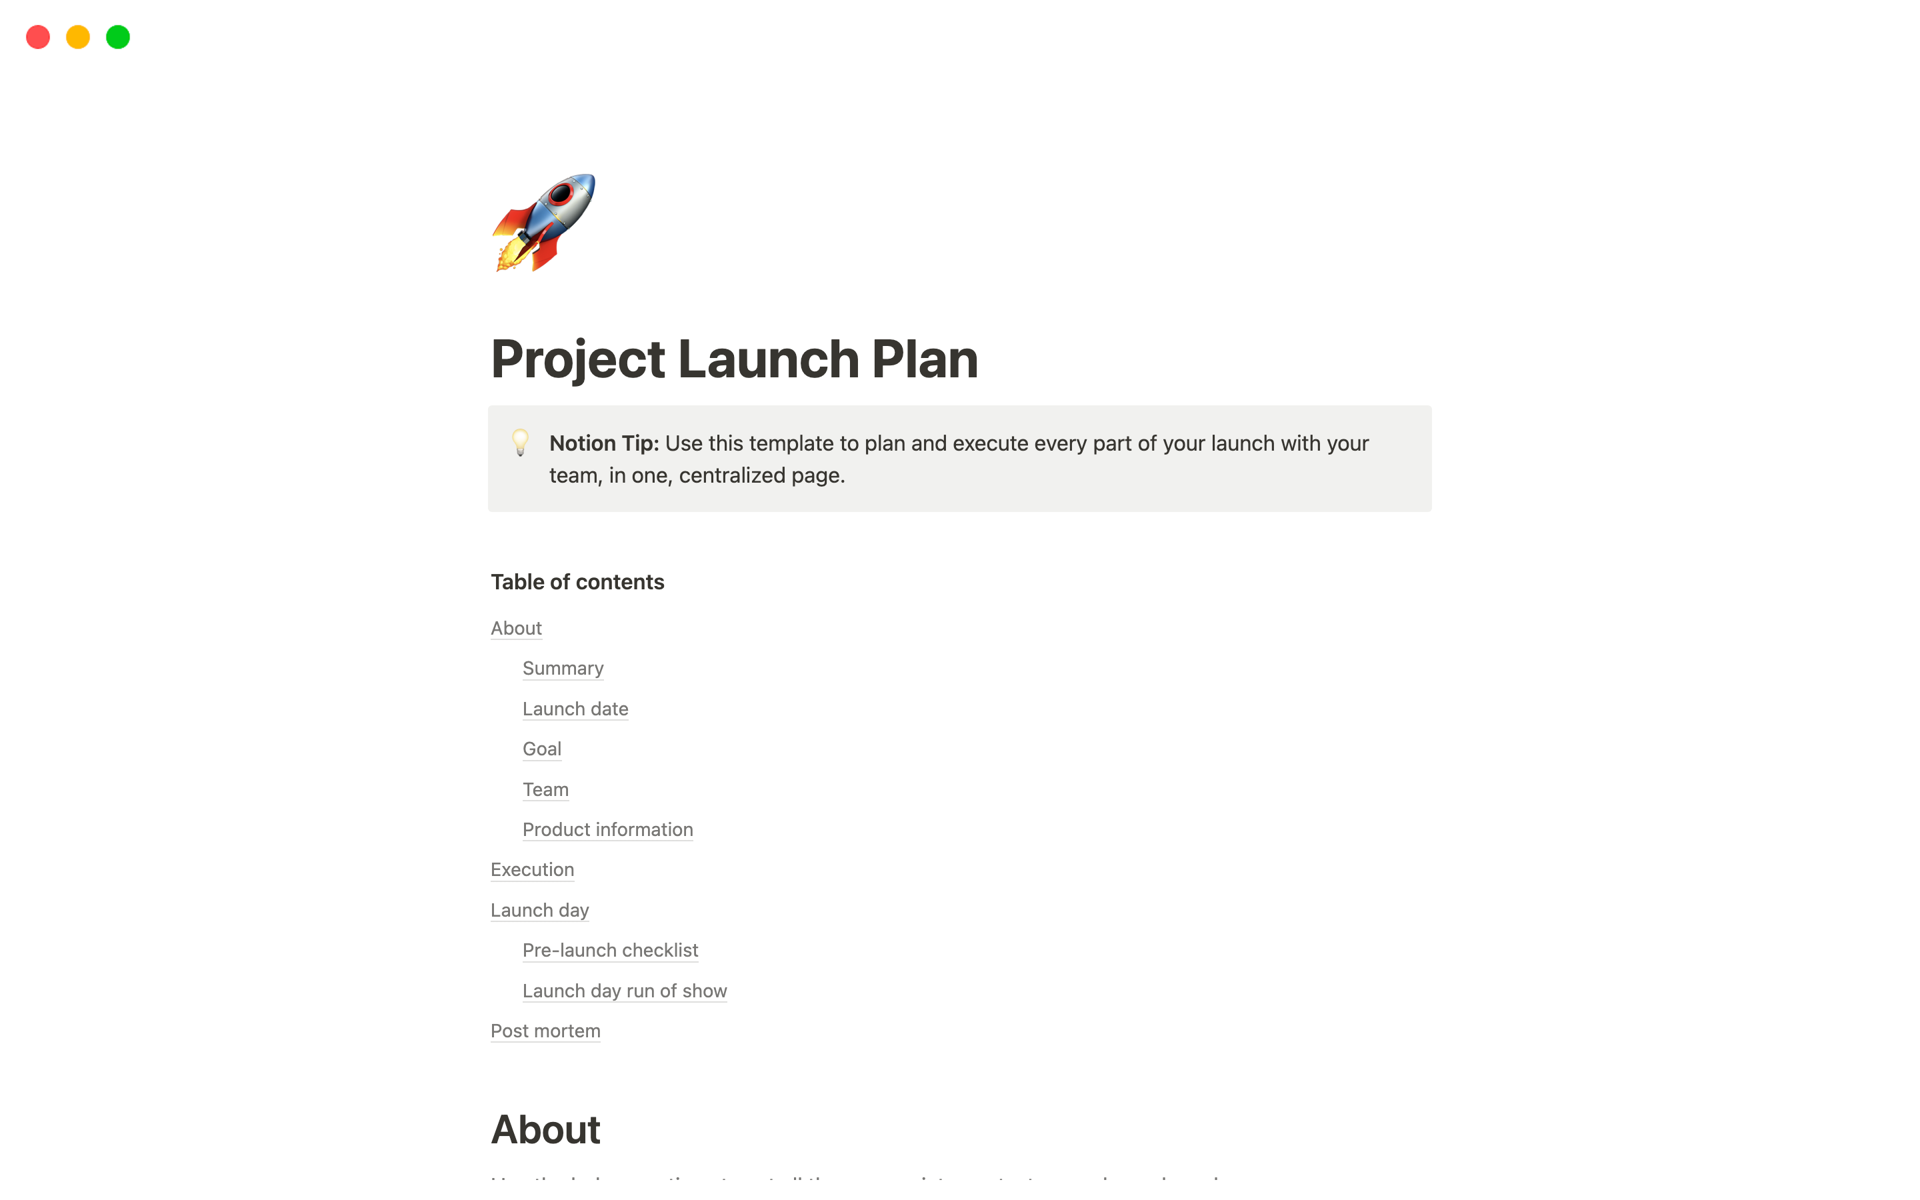 Navigate your project launch seamlessly with our comprehensive Project Launch Plan template.